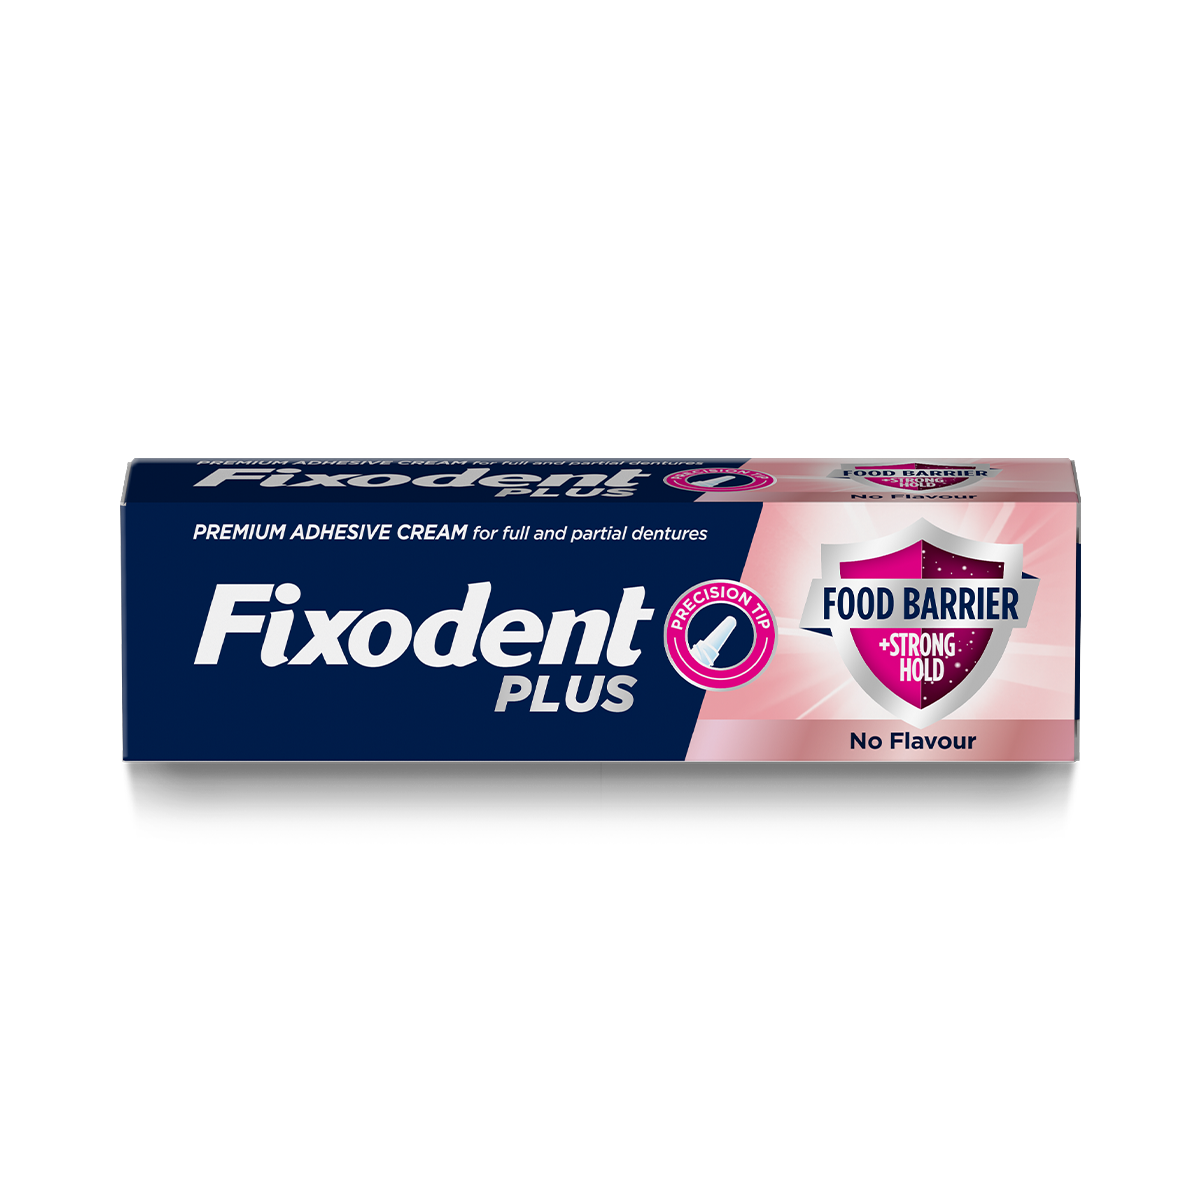 Fixodent Plus Food Barrier product